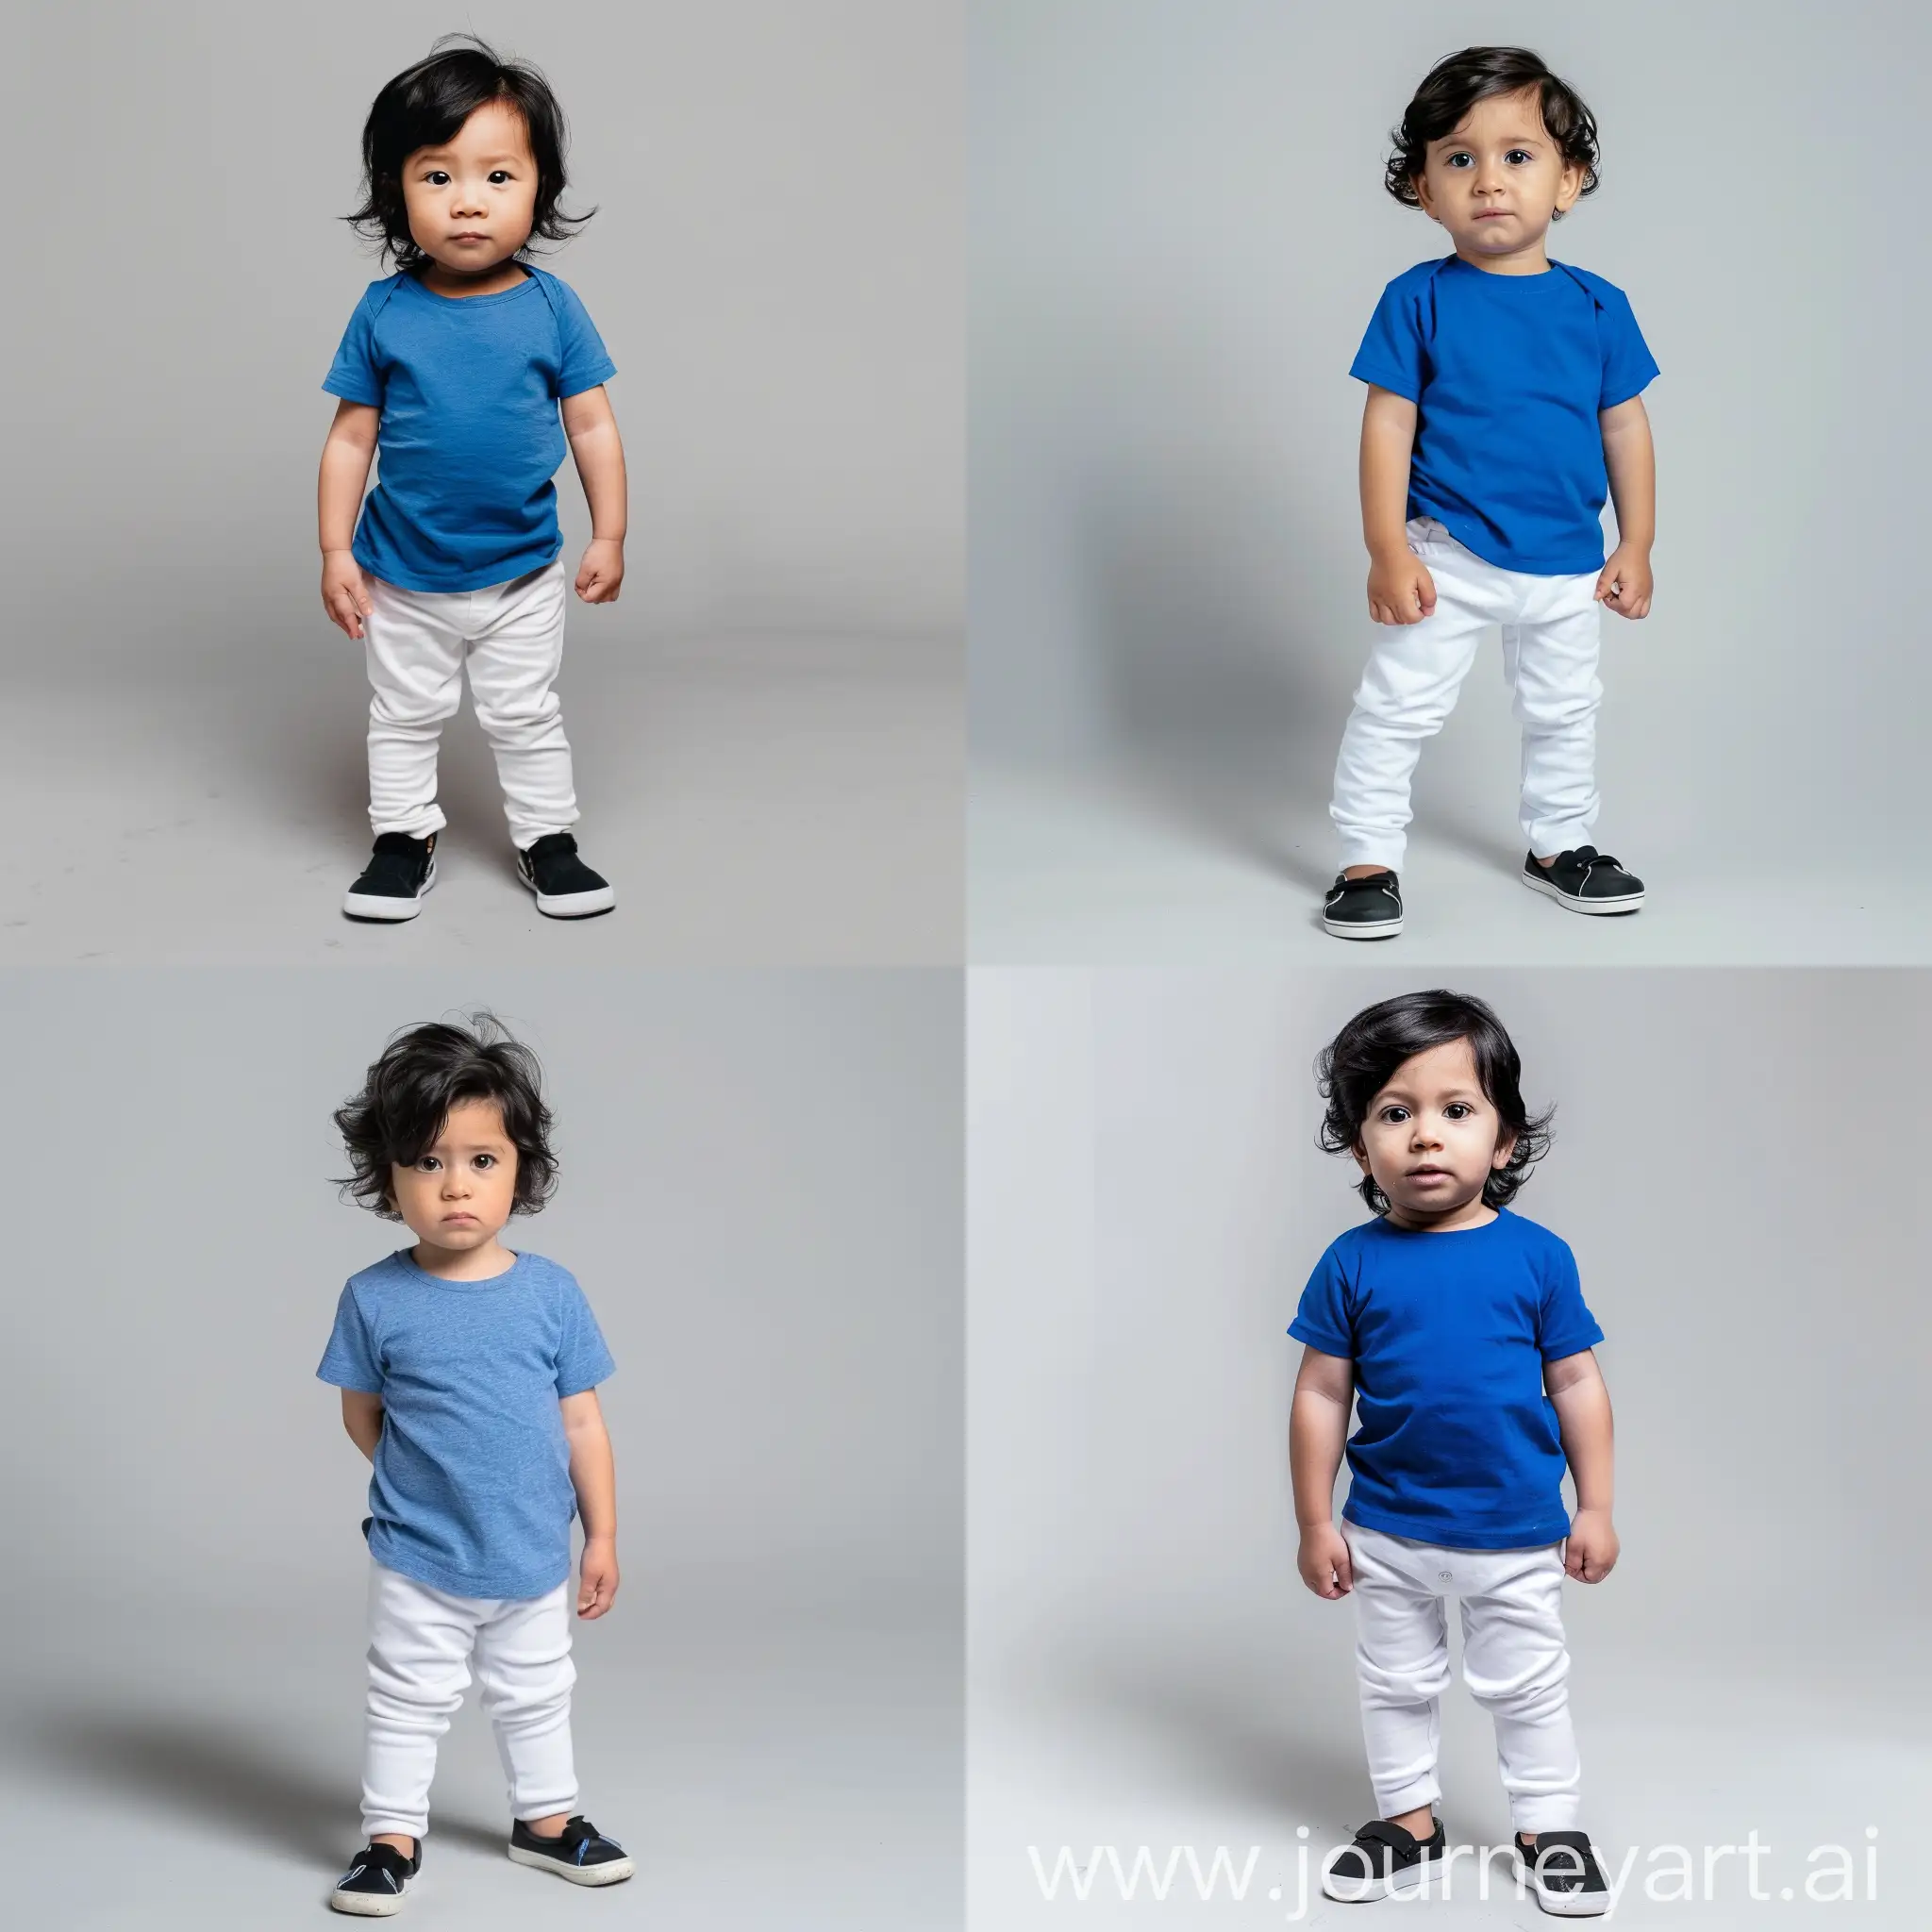 Adorable-OneYearOld-Toddler-in-Blue-TShirt-and-White-Pants